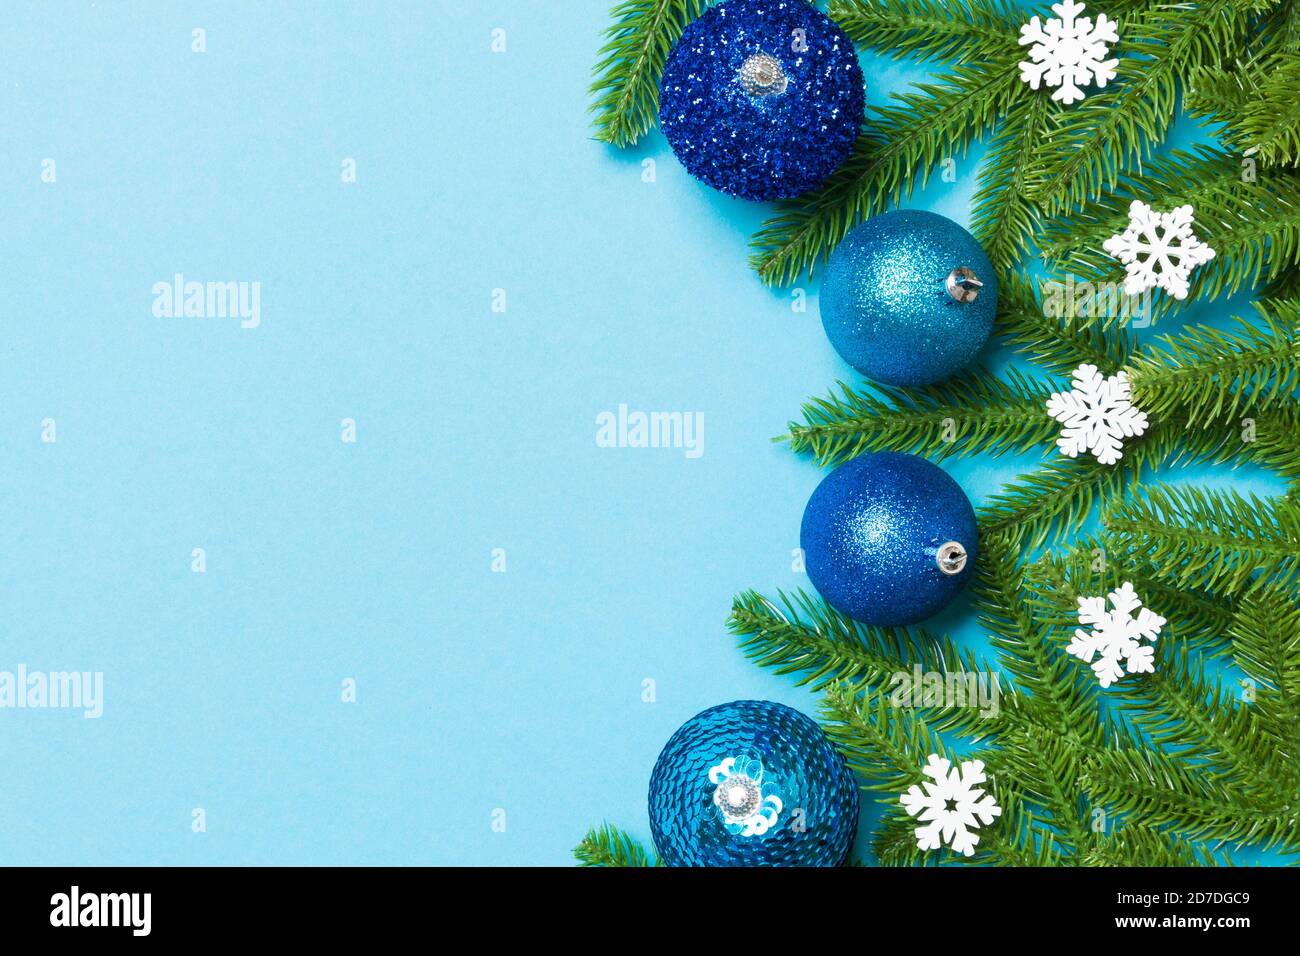 Christmas composition made of fir tree, balls and different decorations on colorful background. Top view of New Year Advent concept with empty space f Stock Photo